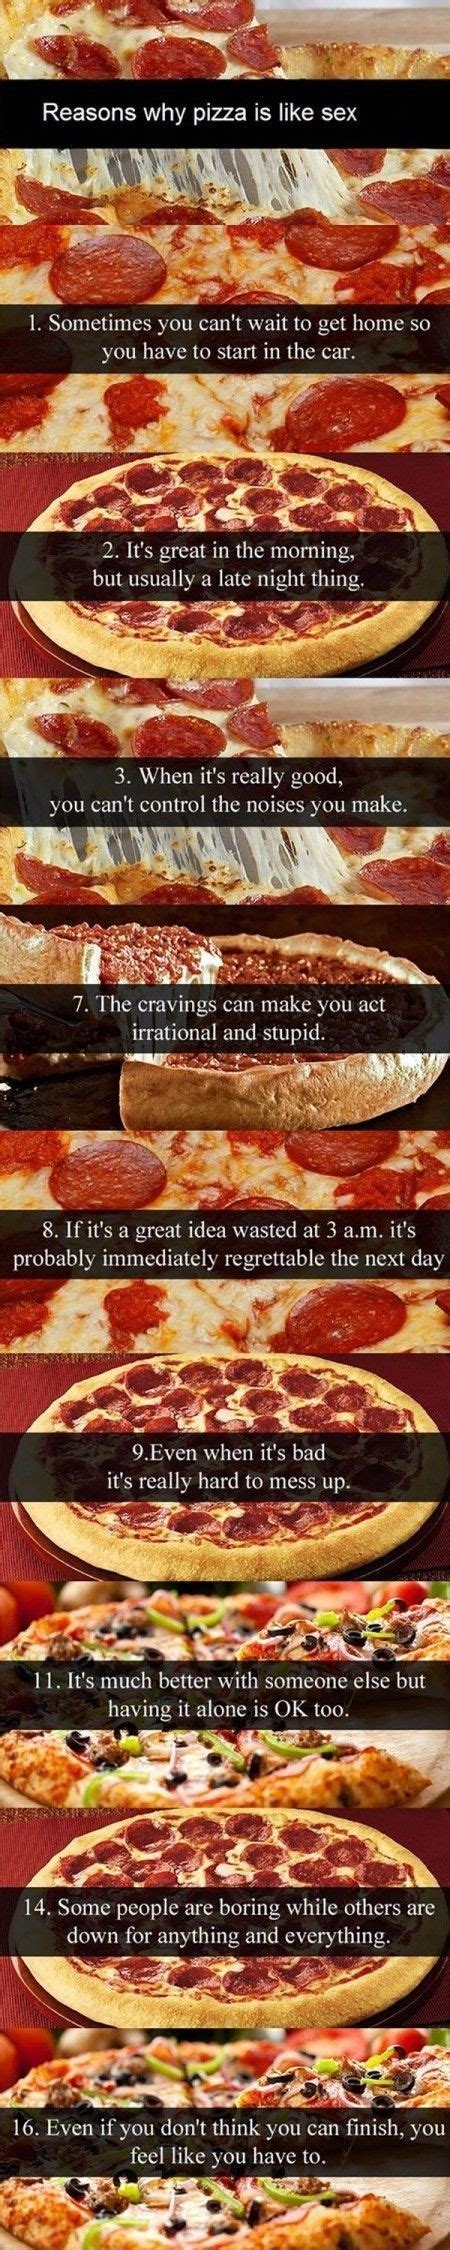 16 Reasons Pizza Is Like Sex Pictures Photos And Images